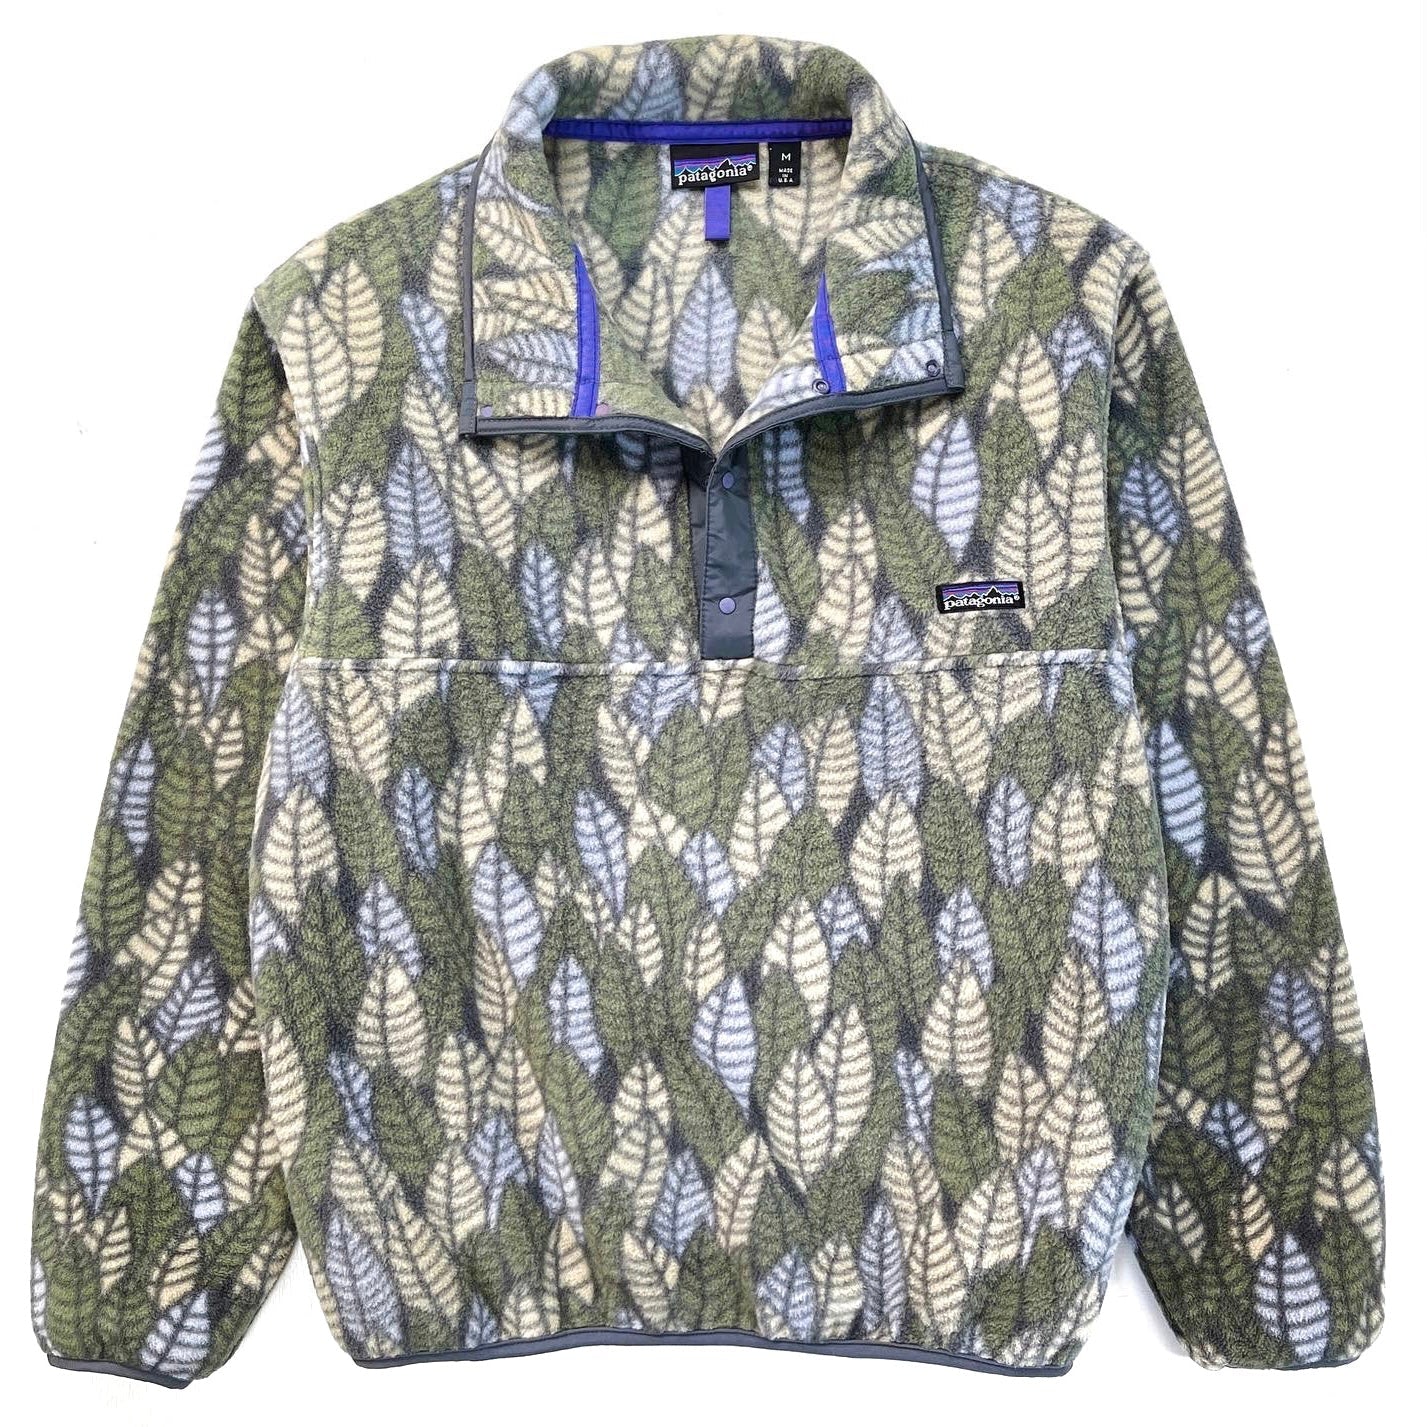 1992 Patagonia Printed Synchilla Snap-T, Spears: Elephant (M)